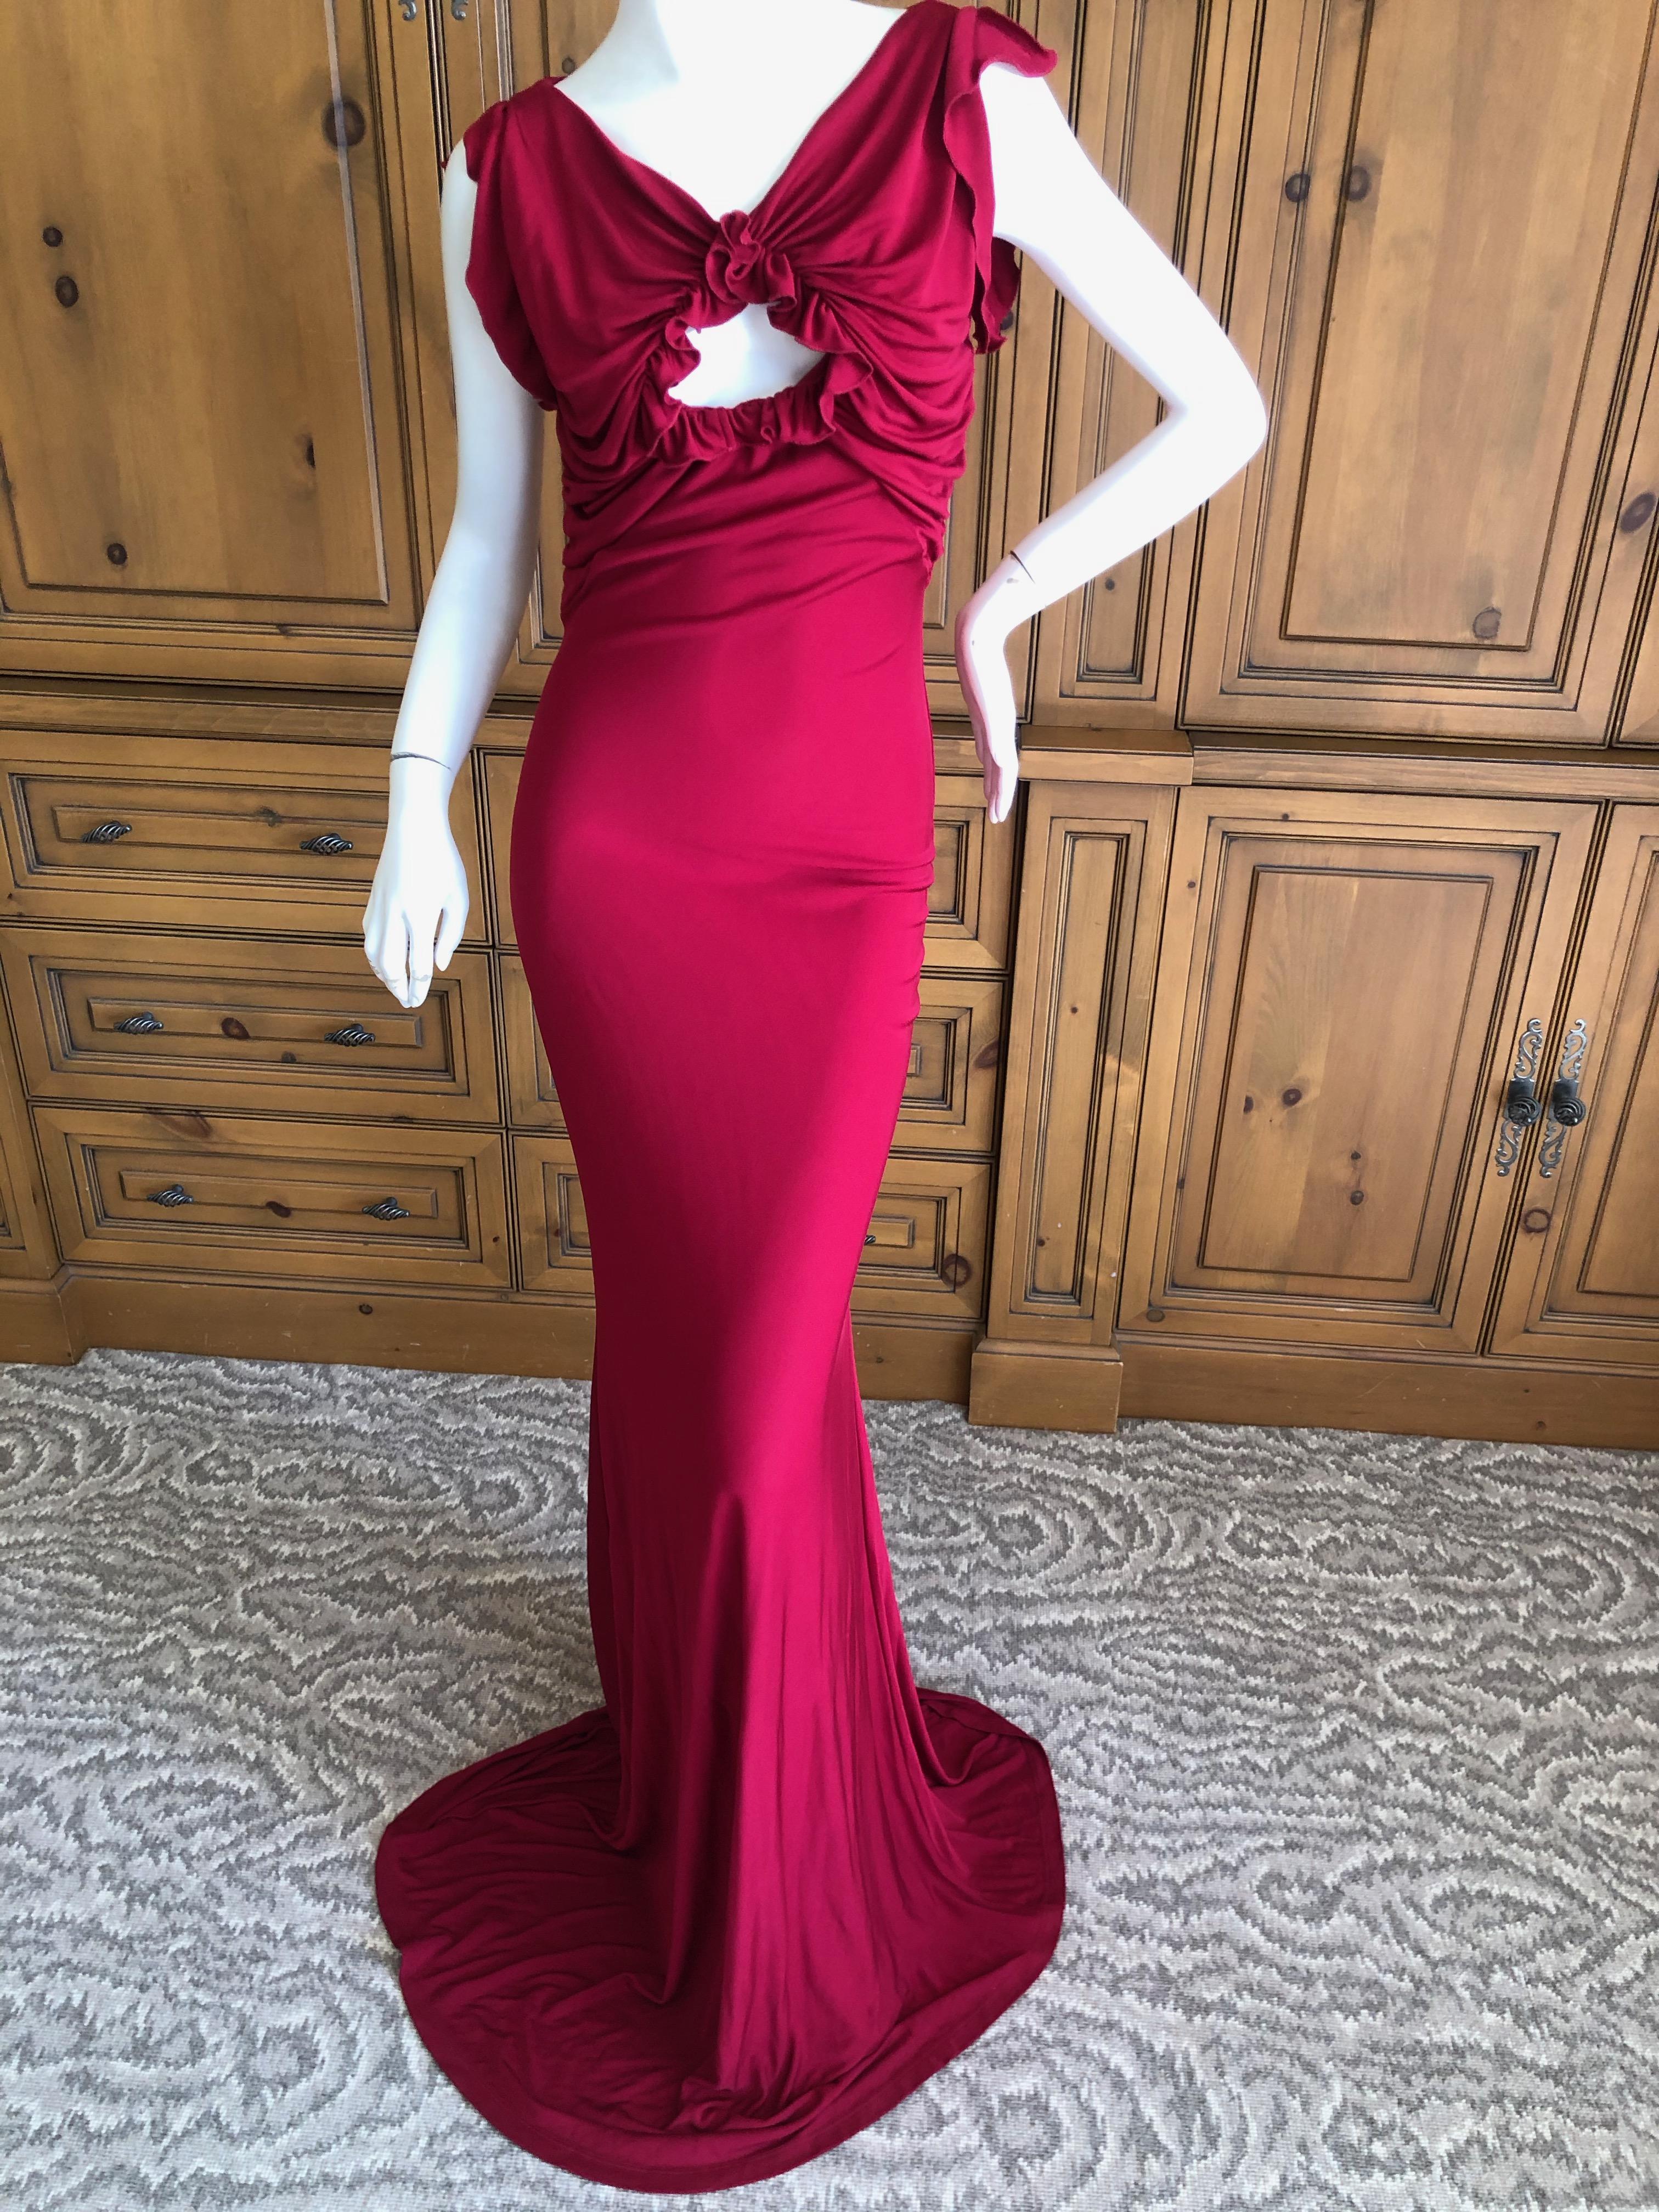   John Galliano Vintage Bias Cut Red Evening Dress with Keyhole Details In Excellent Condition For Sale In Cloverdale, CA